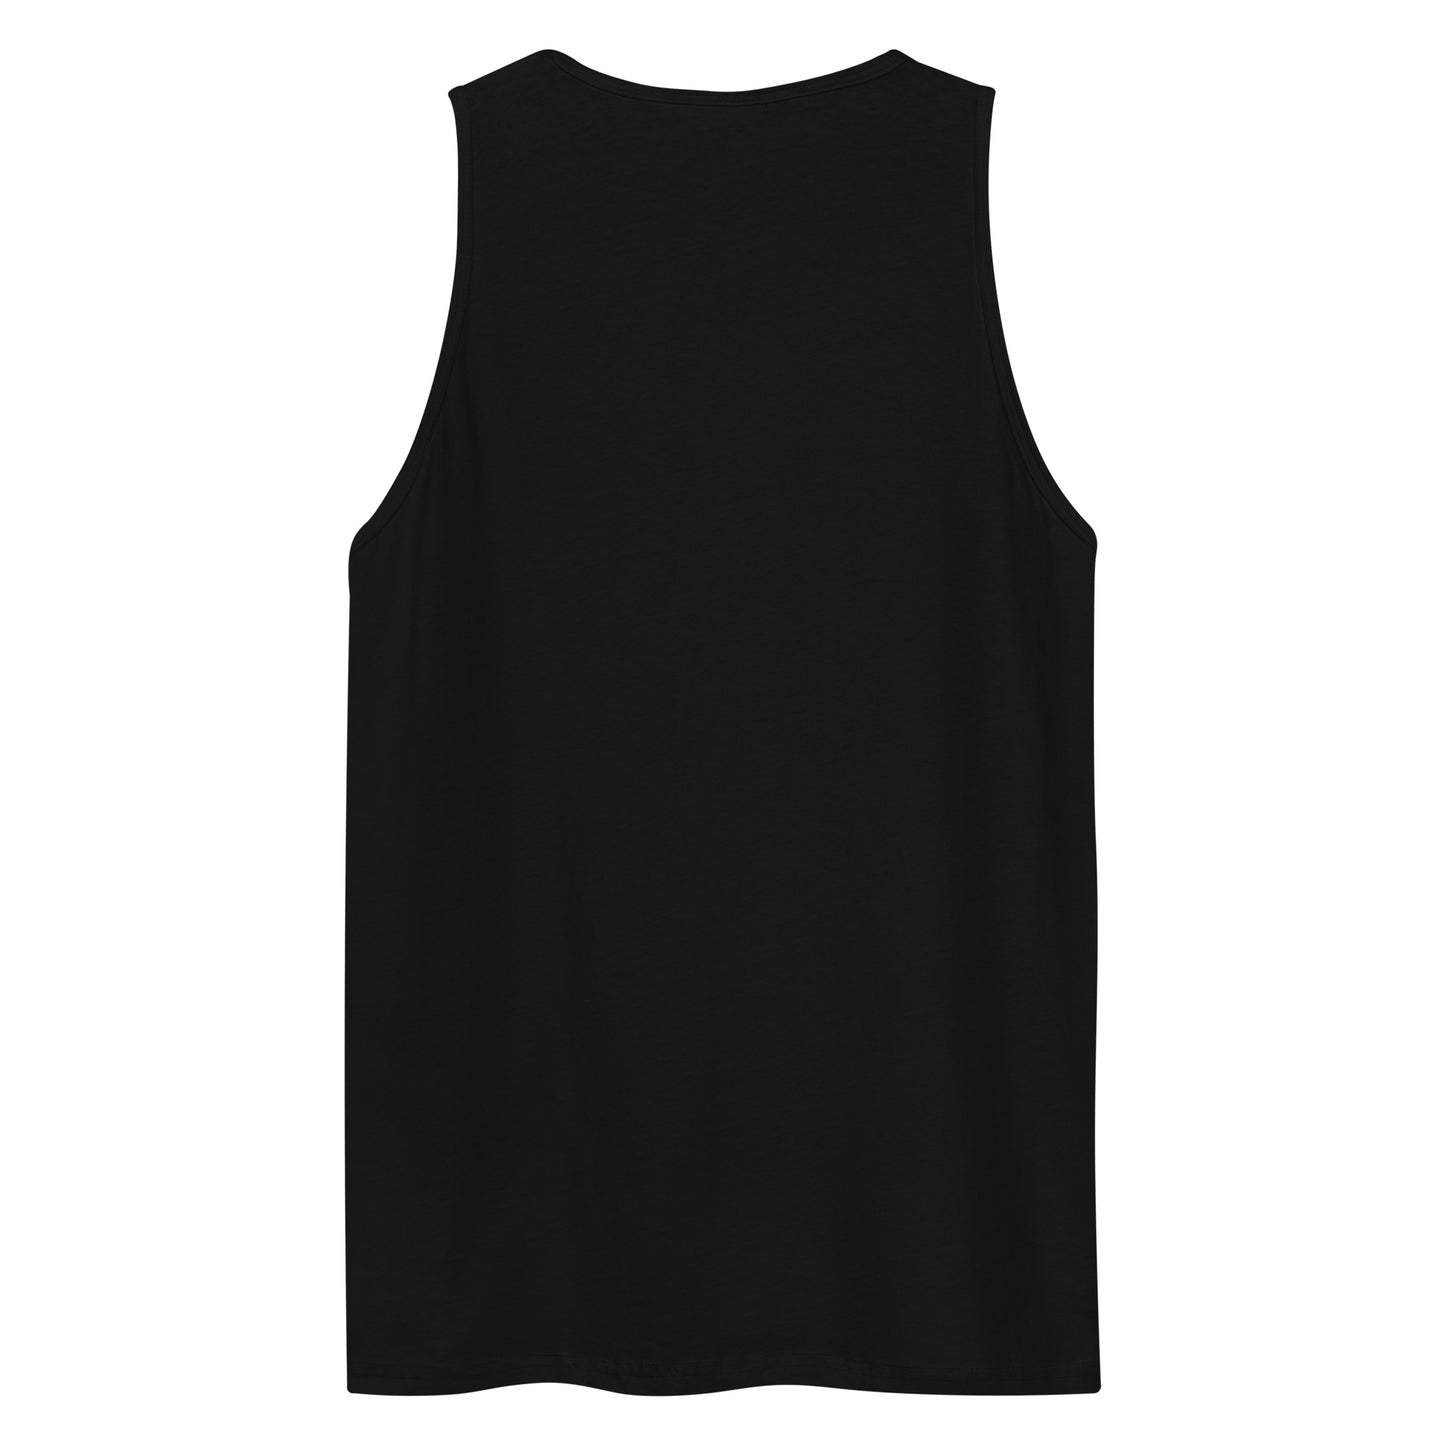 It Doesn't Need To Be Rewritten It Needs To Be Reread Unisex Tank Top